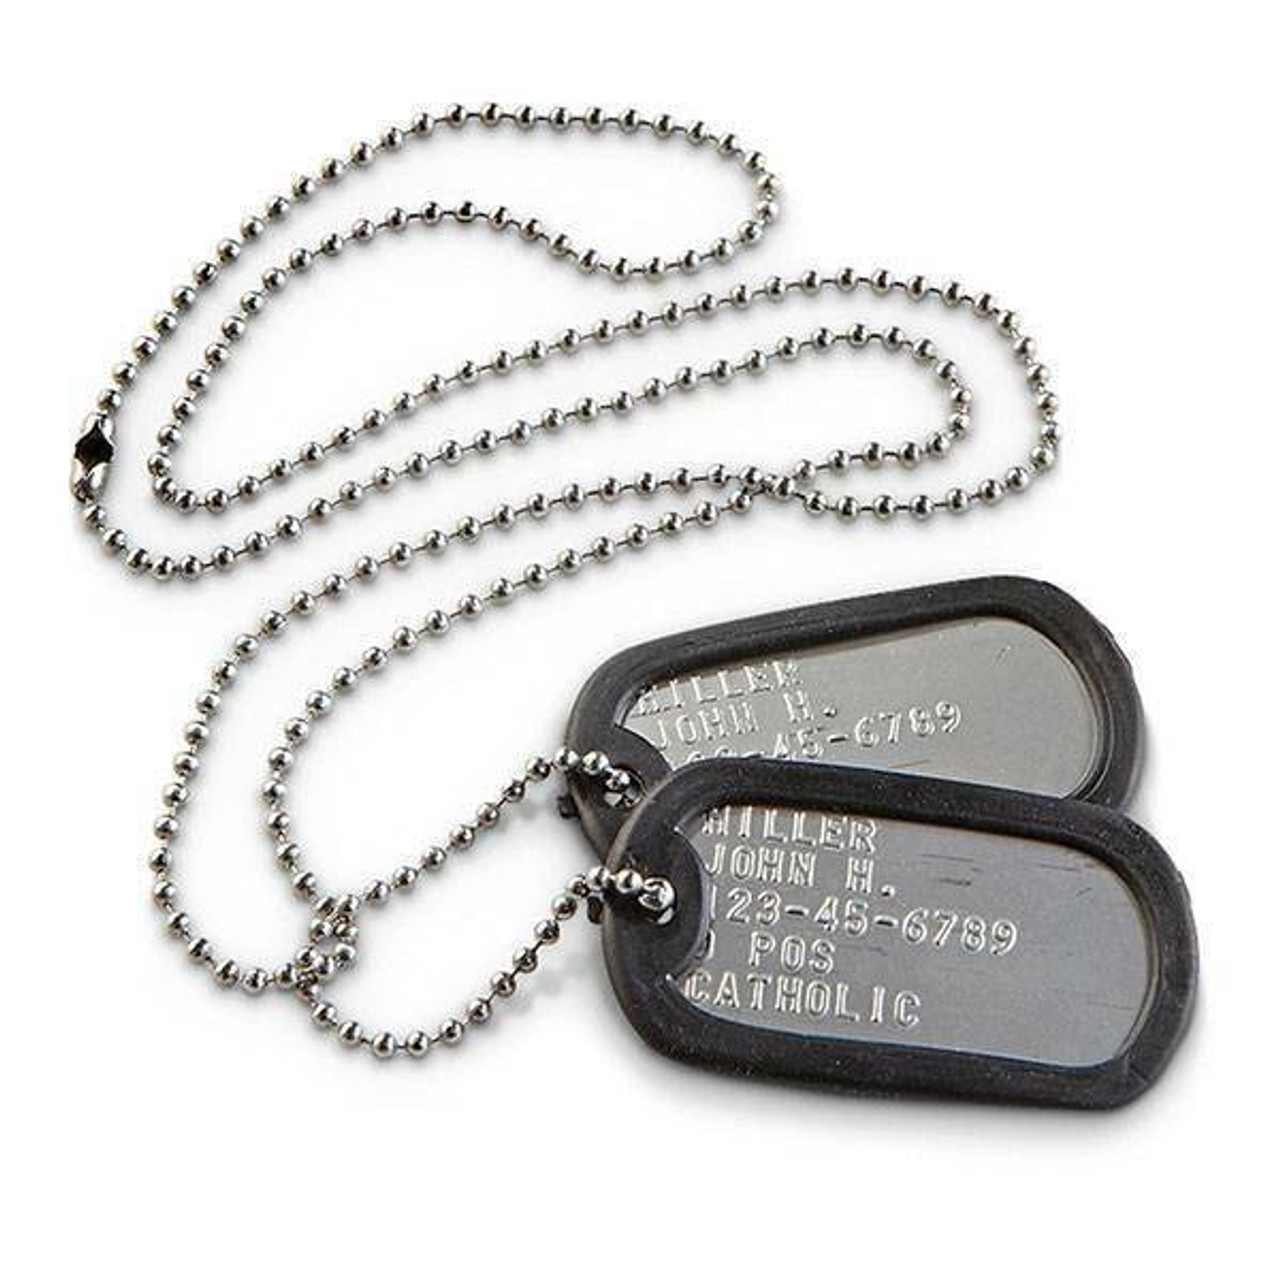 Dog Tags for the Military and First Responders and More